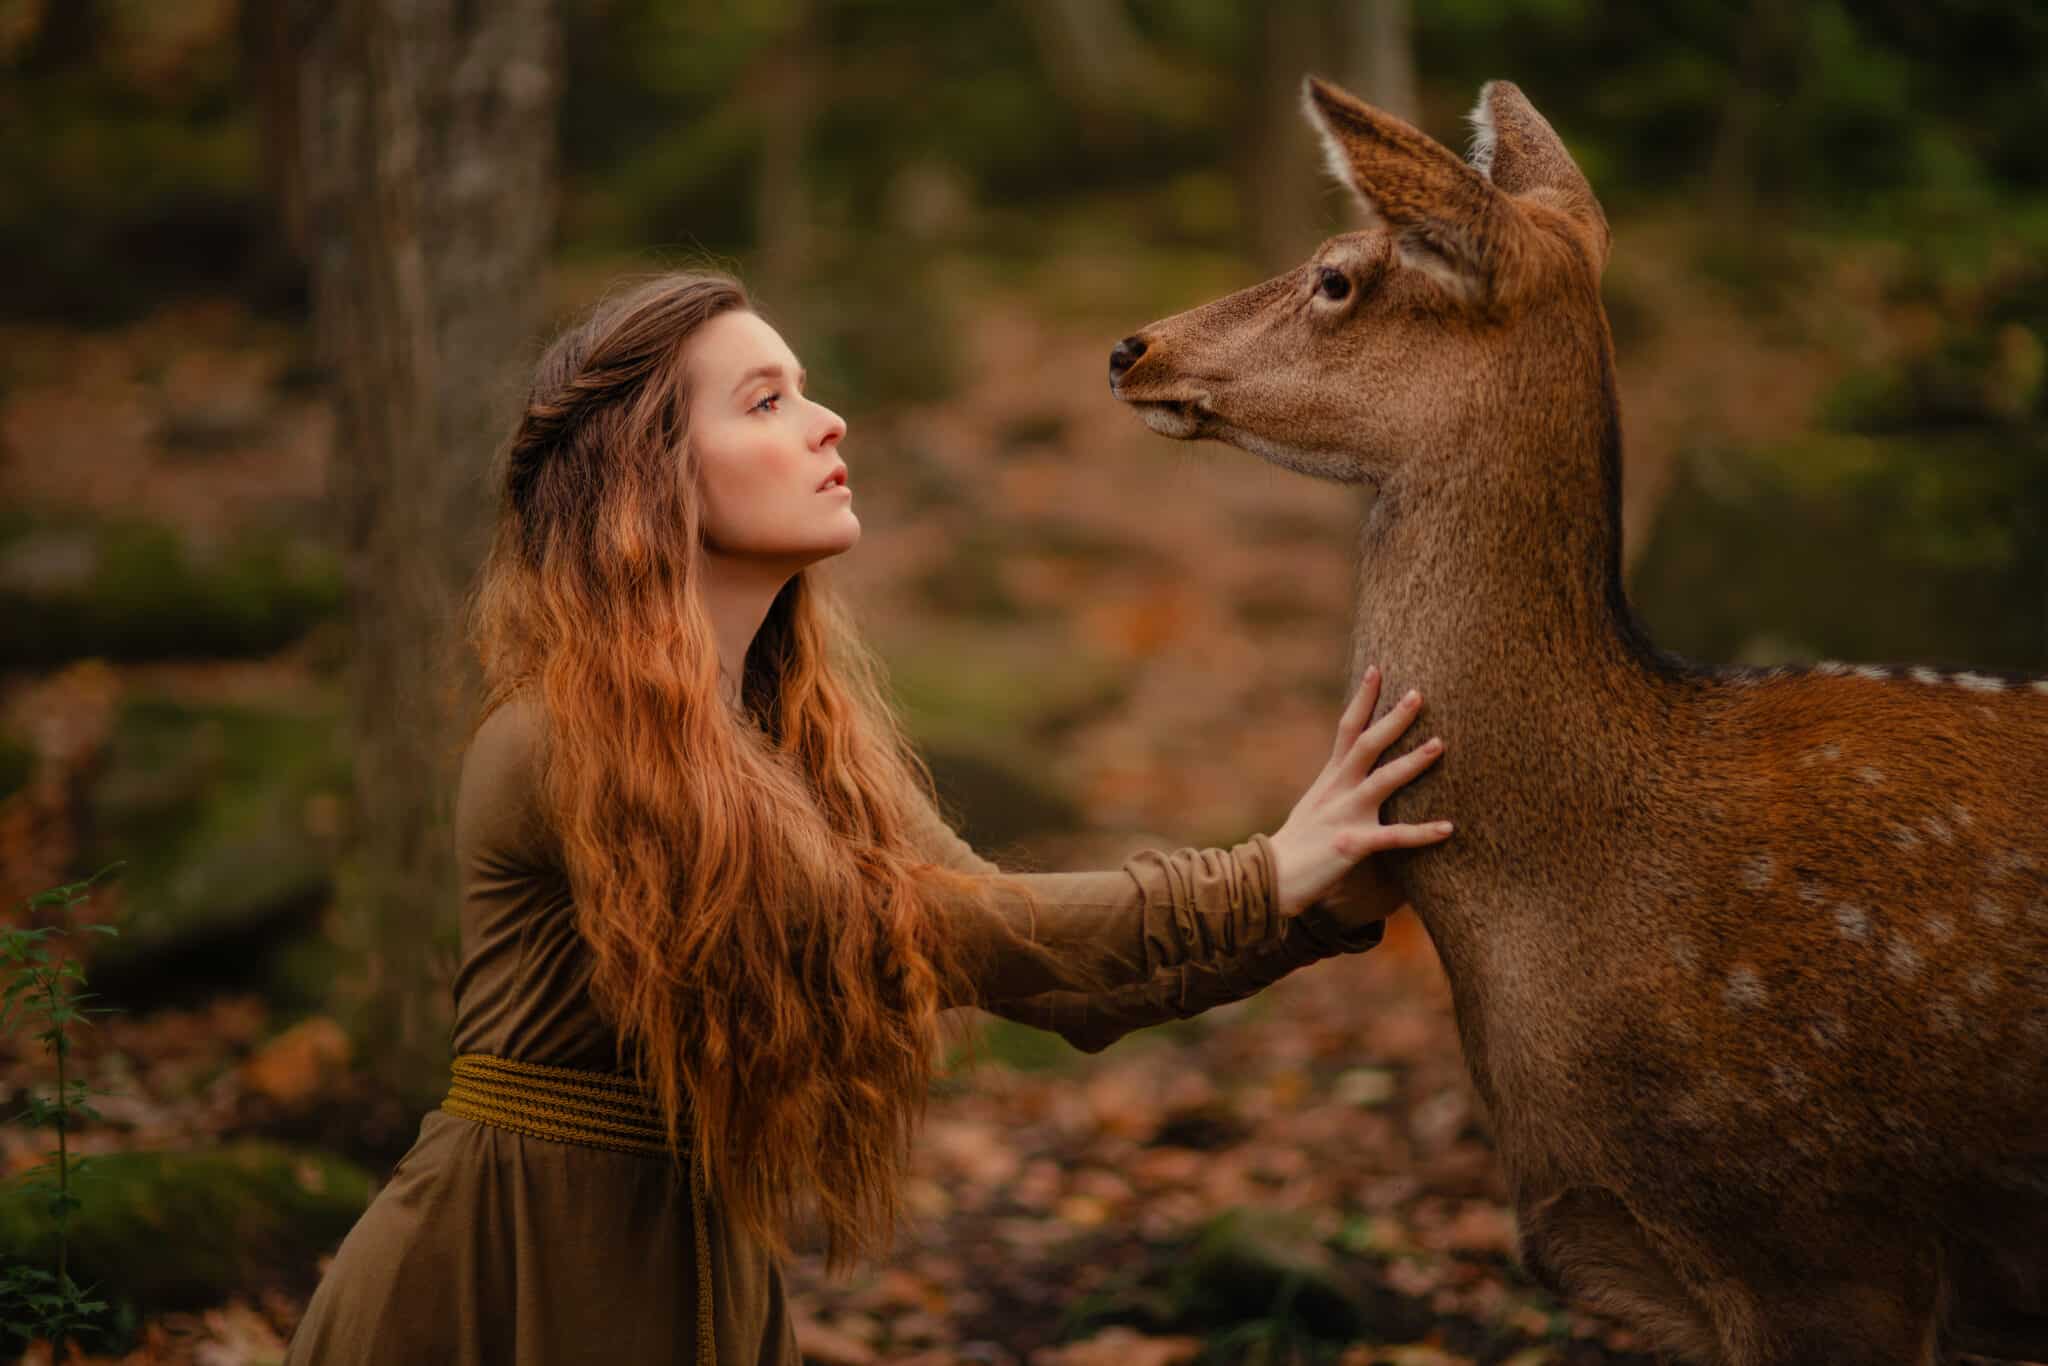 Redhead girl with deer in a long dress.